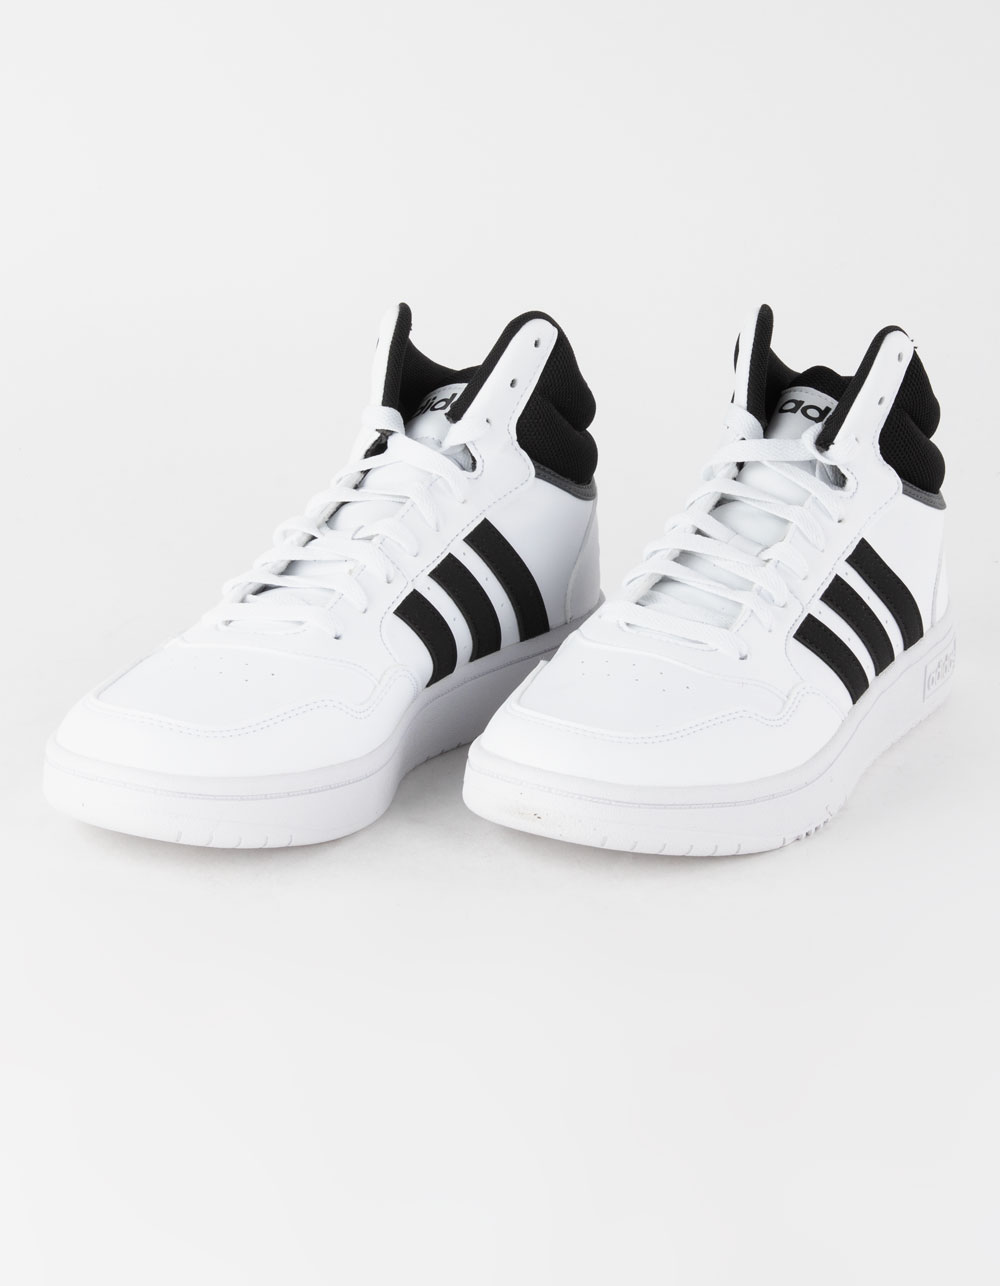 ADIDAS Hoops 3.0 Mid Classic Vintage Mens Shoes - WHT/BLK | Tillys